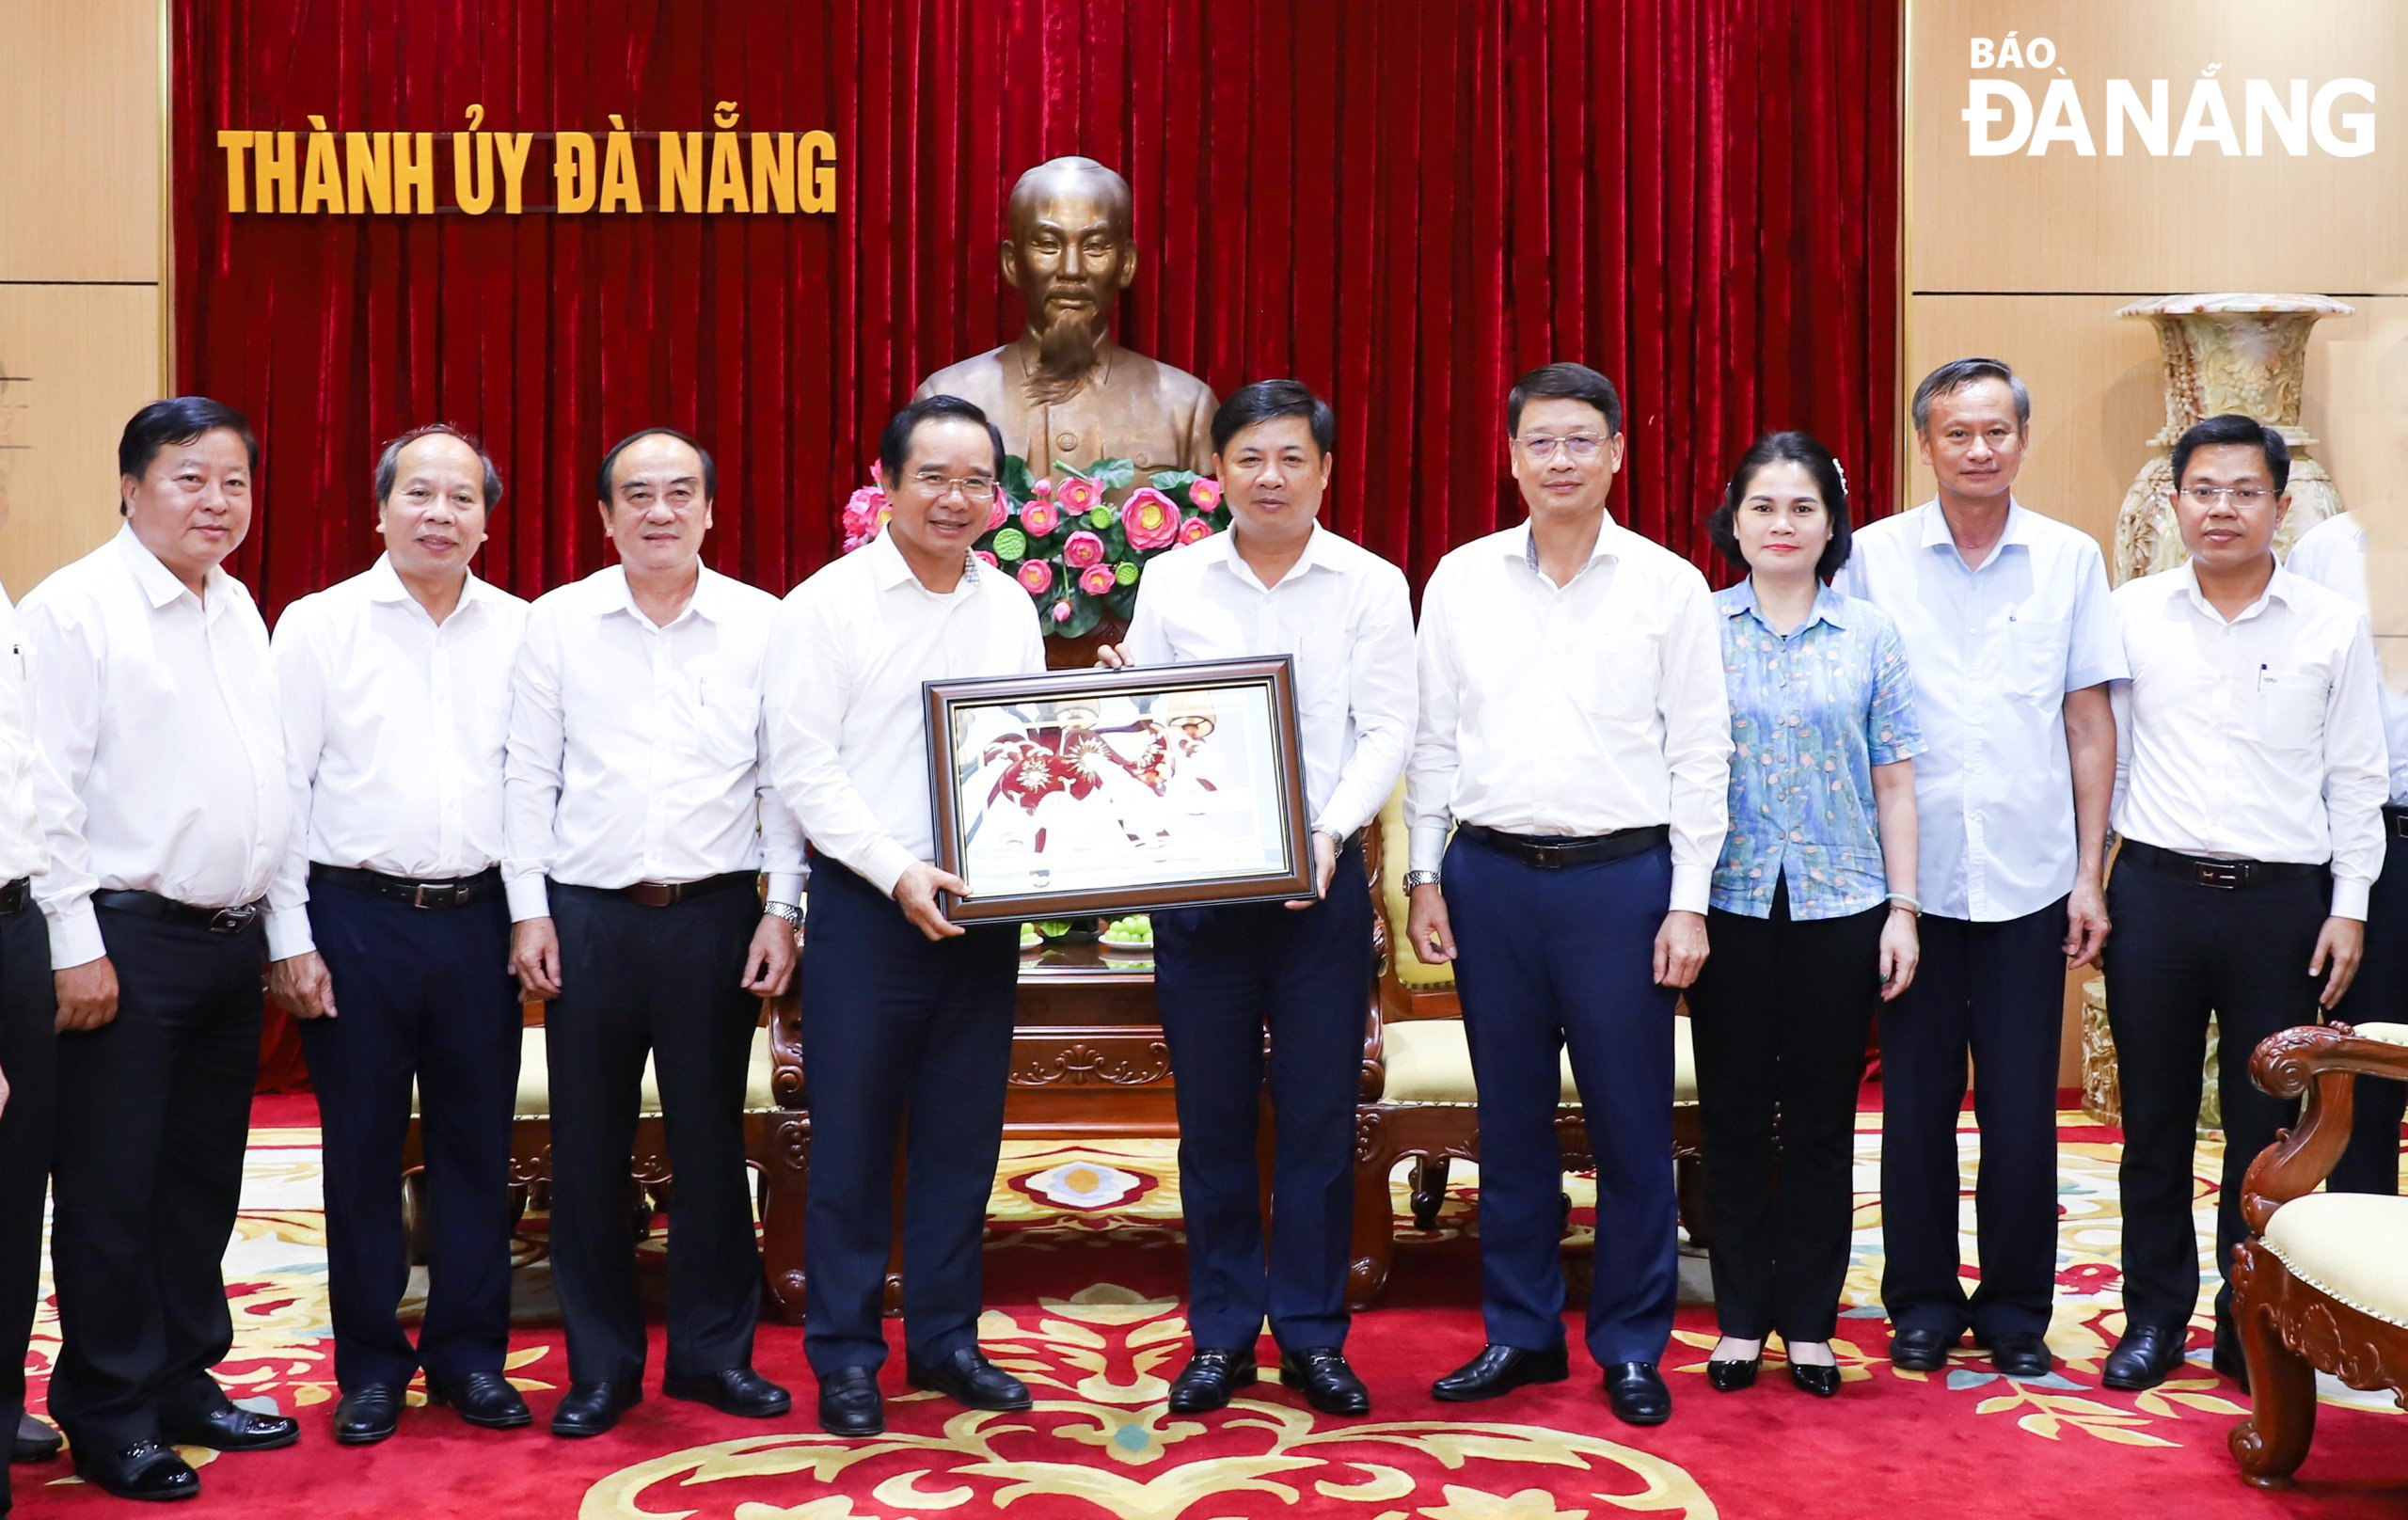 Da Nang Party Committee Deputy Secretary cum People's Council Chairman Luong Nguyen Minh Triet gives a souvenir to the delegation of Long An Province. Photo: NGOC PHU